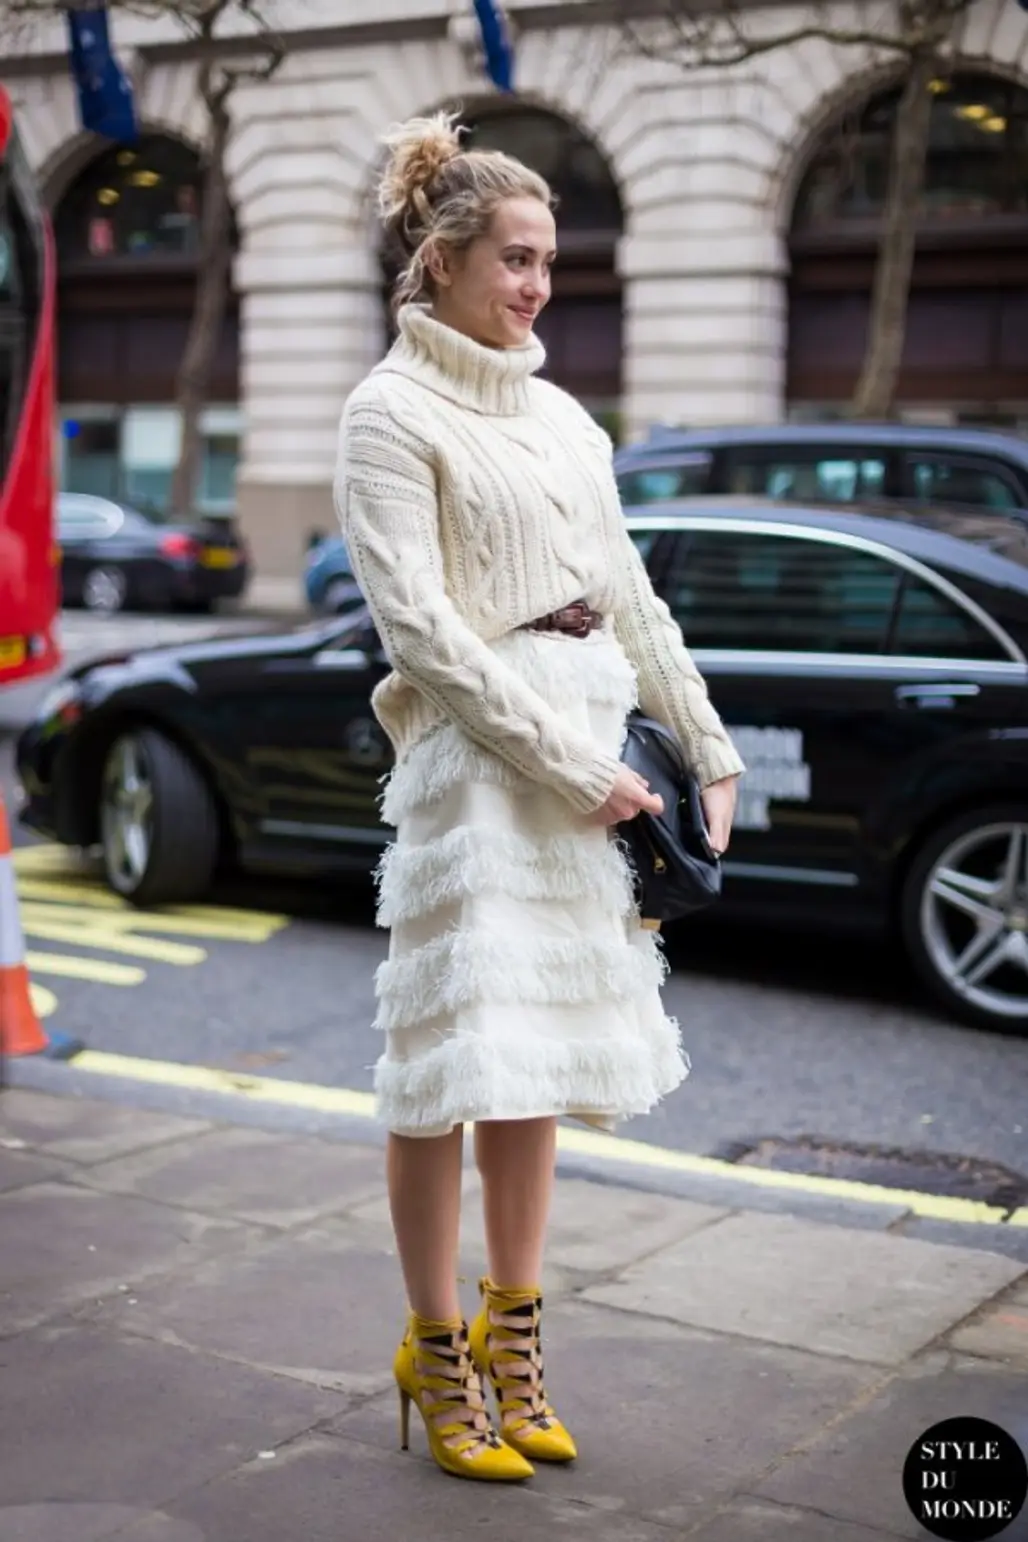 Turtleneck Sweater and a Ruffled Skirt